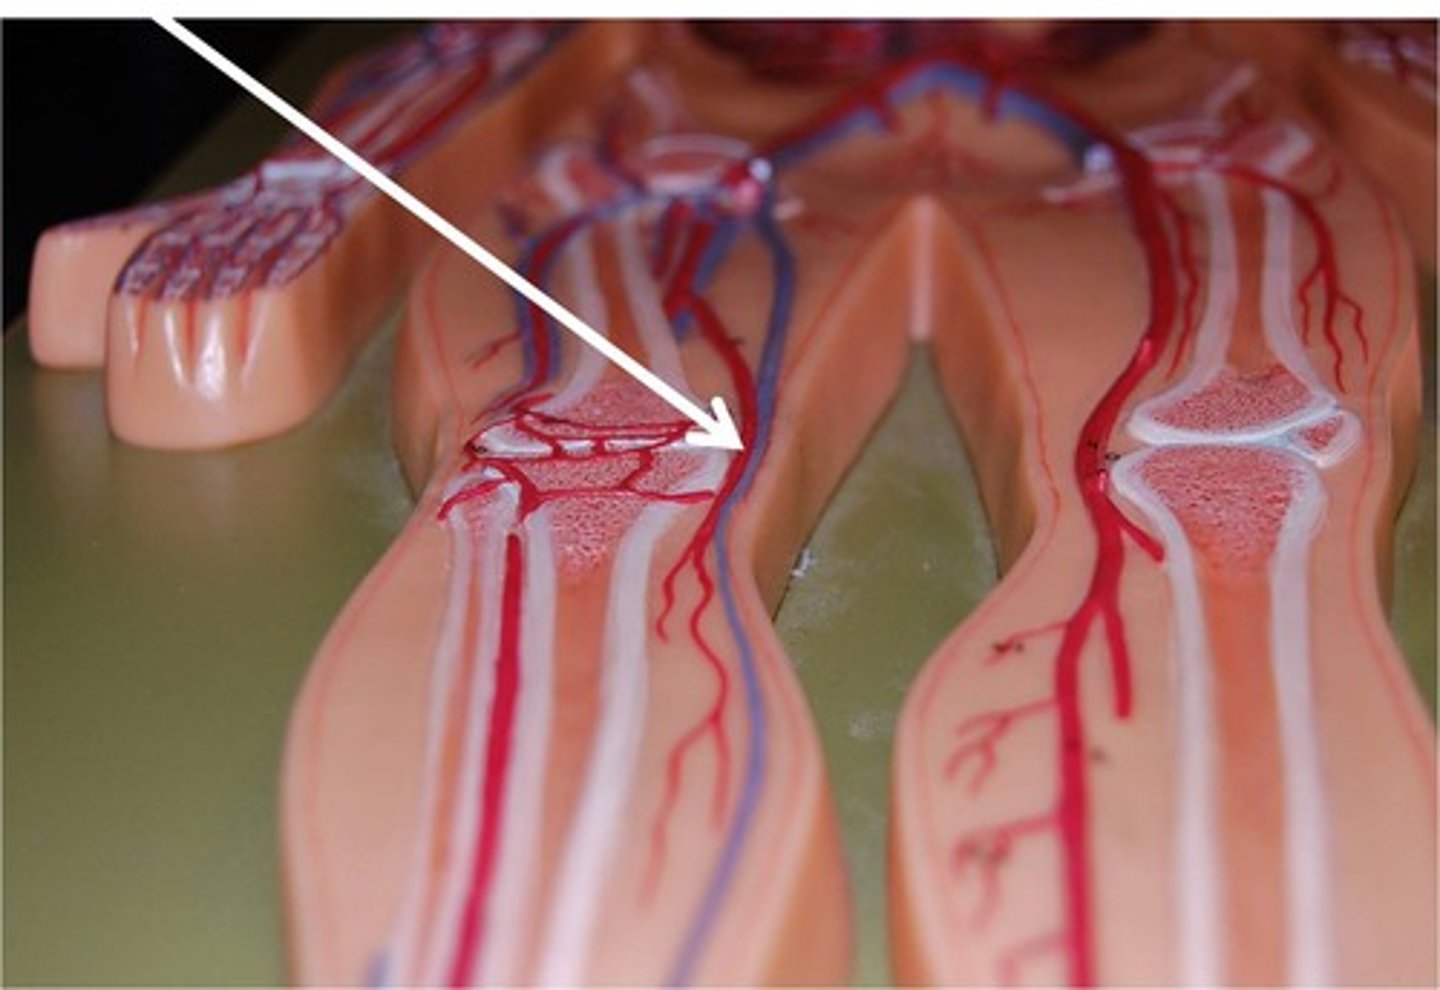 <p>form from the merger of the anterior and posterior tibial veins just inferior to the popliteal fossa; become the femoral veins just superior to the knee</p>